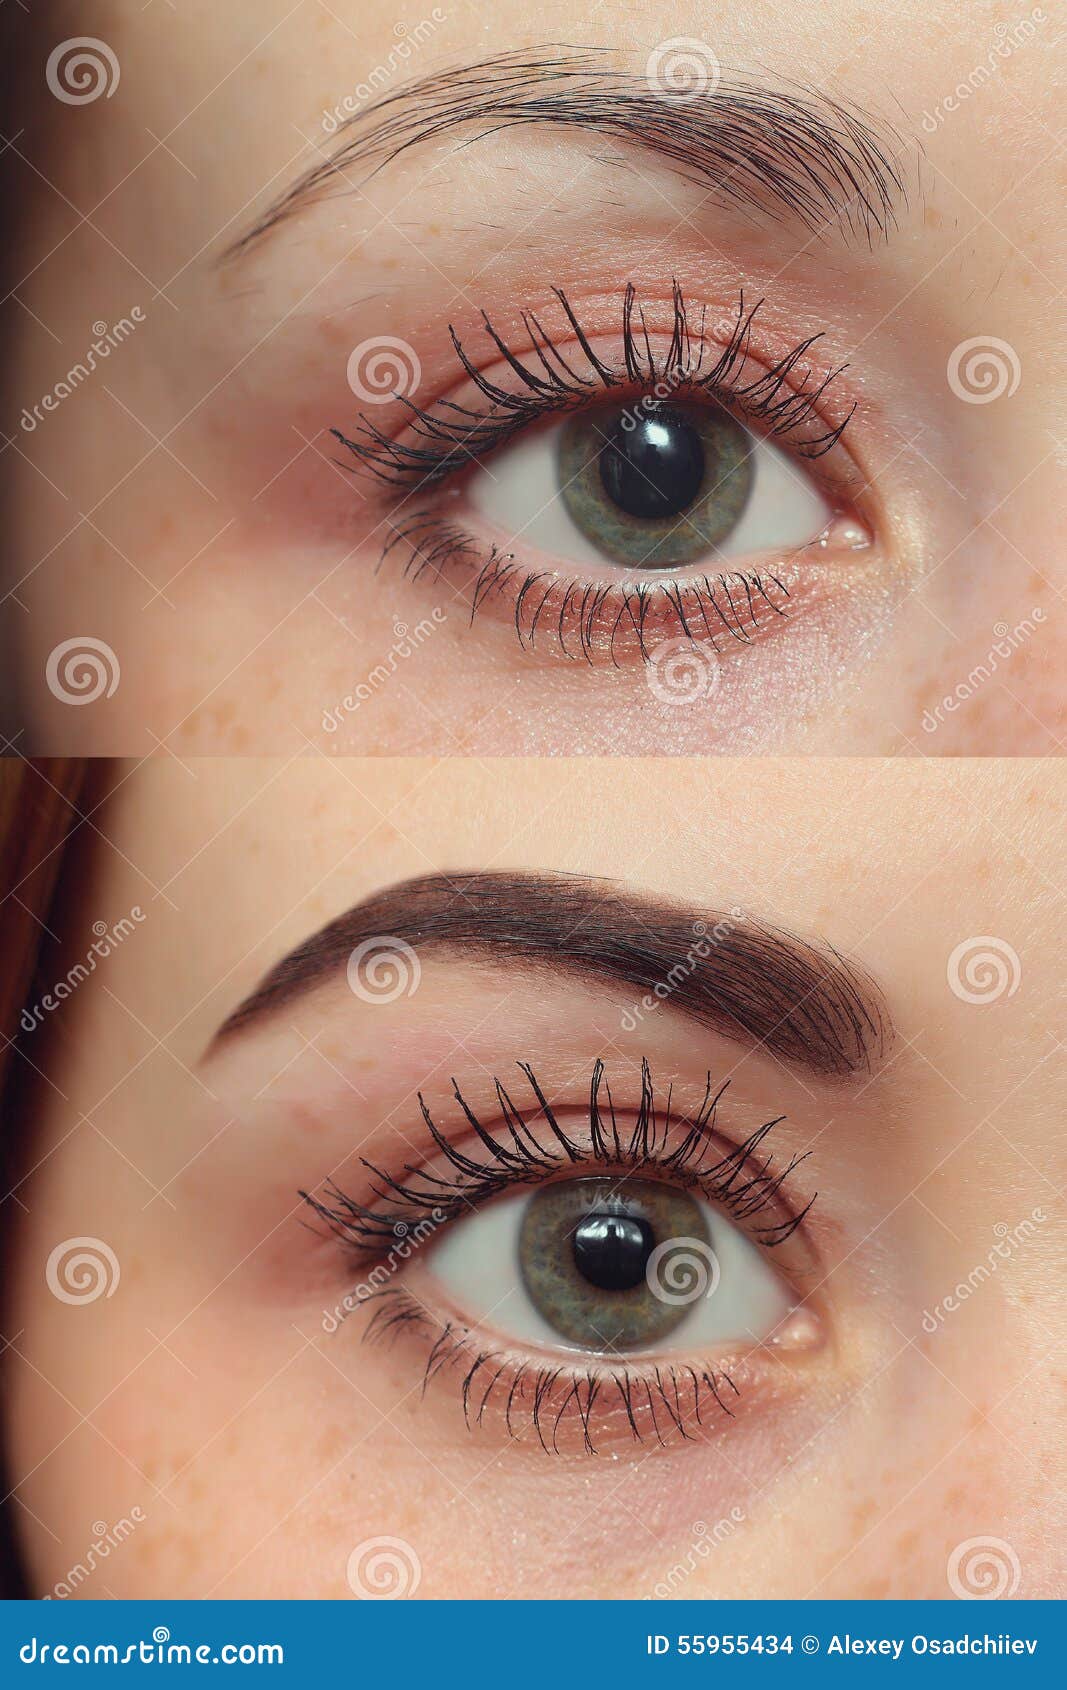 perfect eyebrows before after